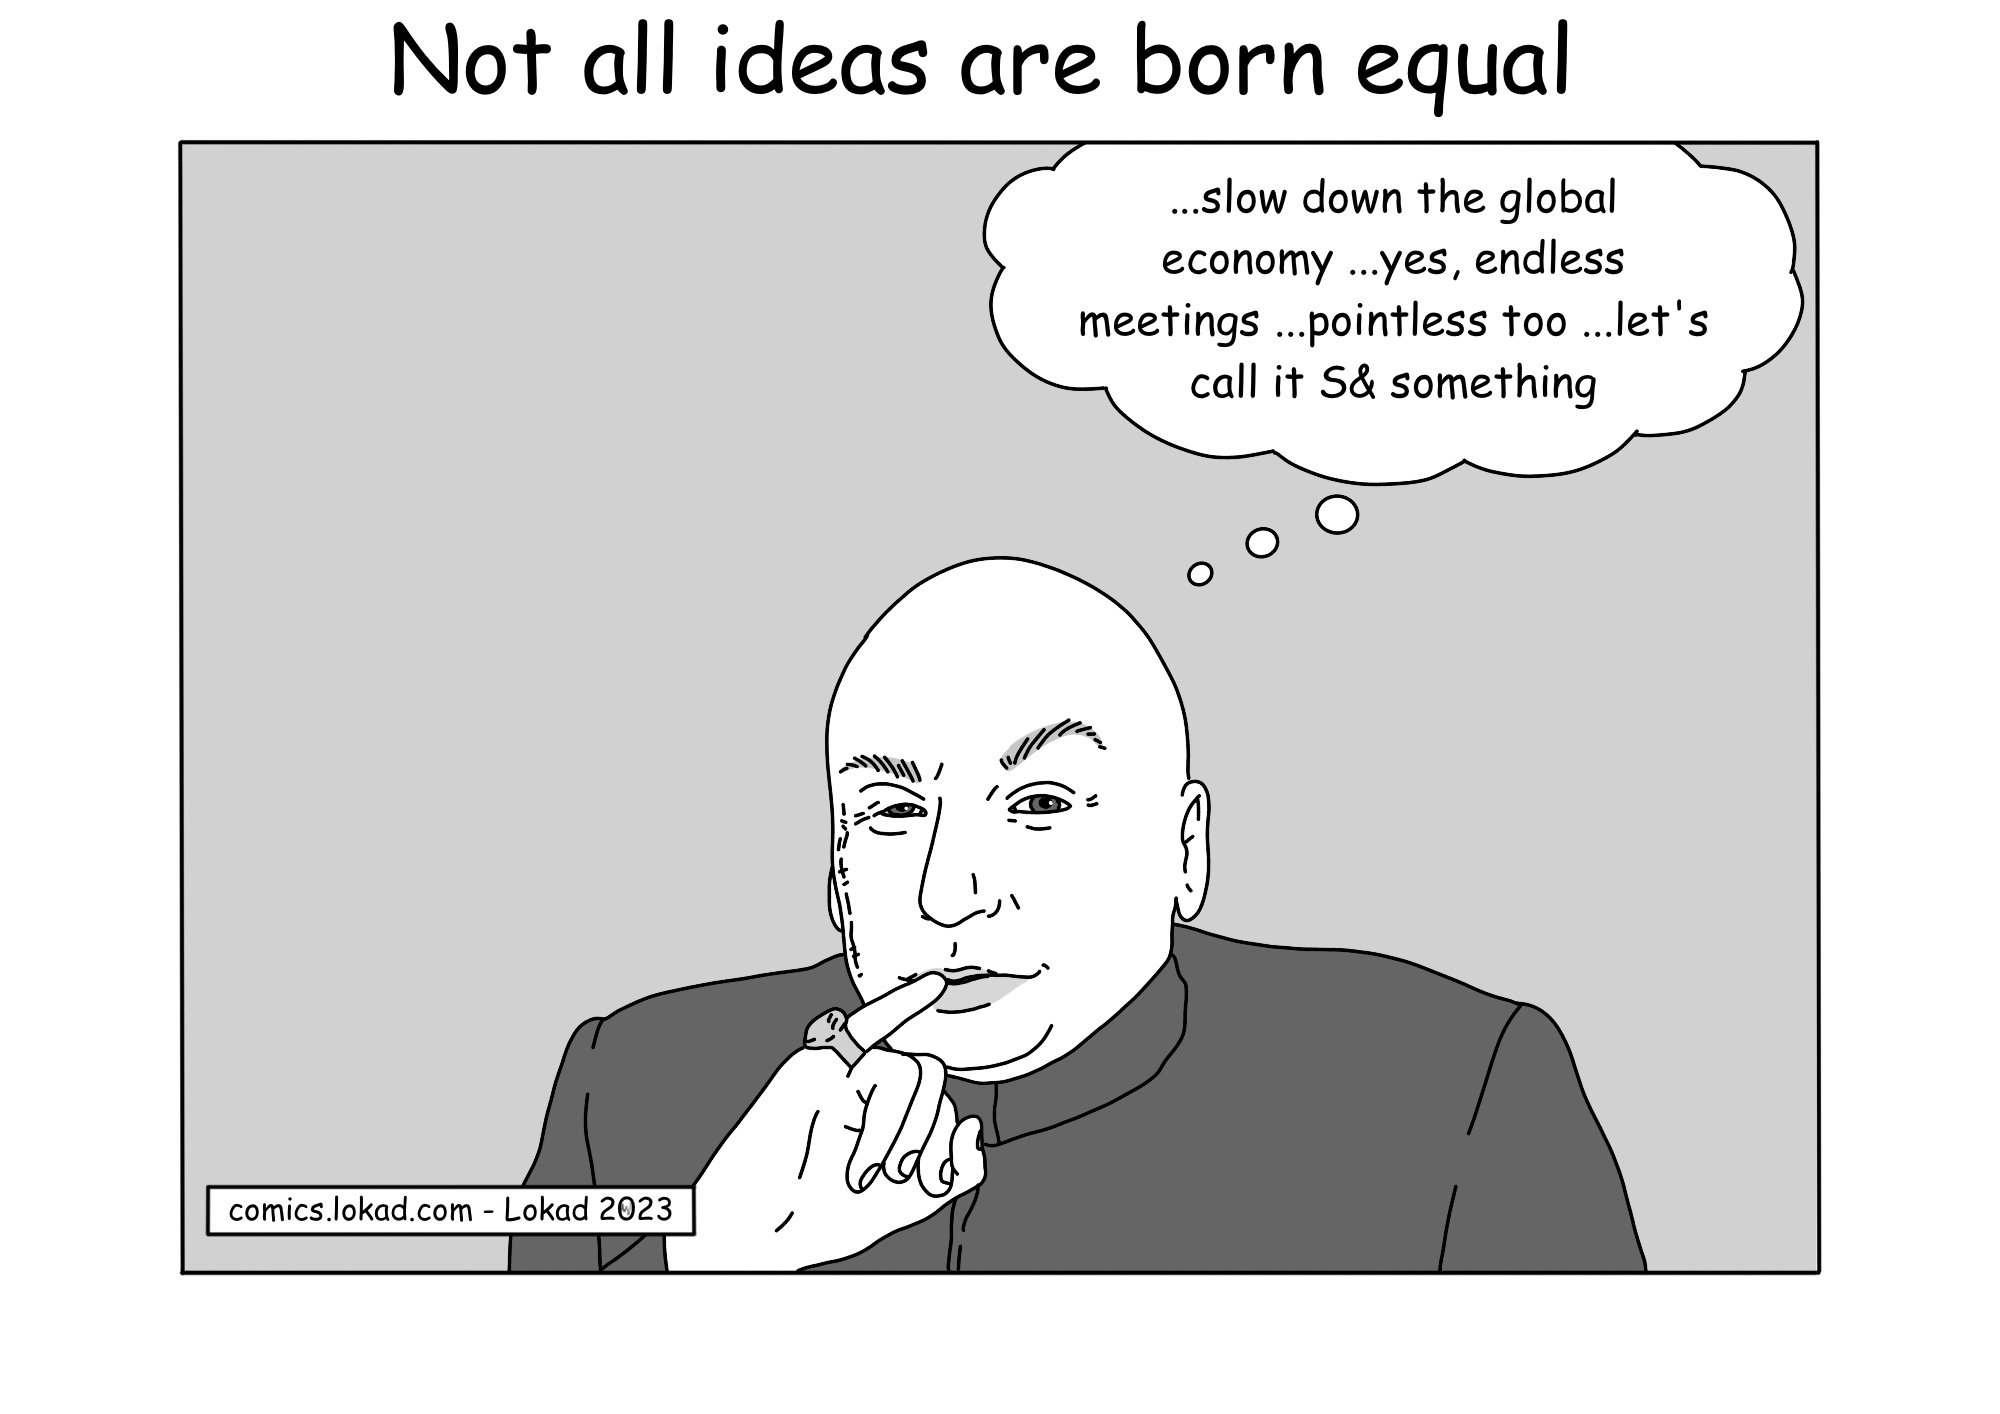 Not all ideas are born equal